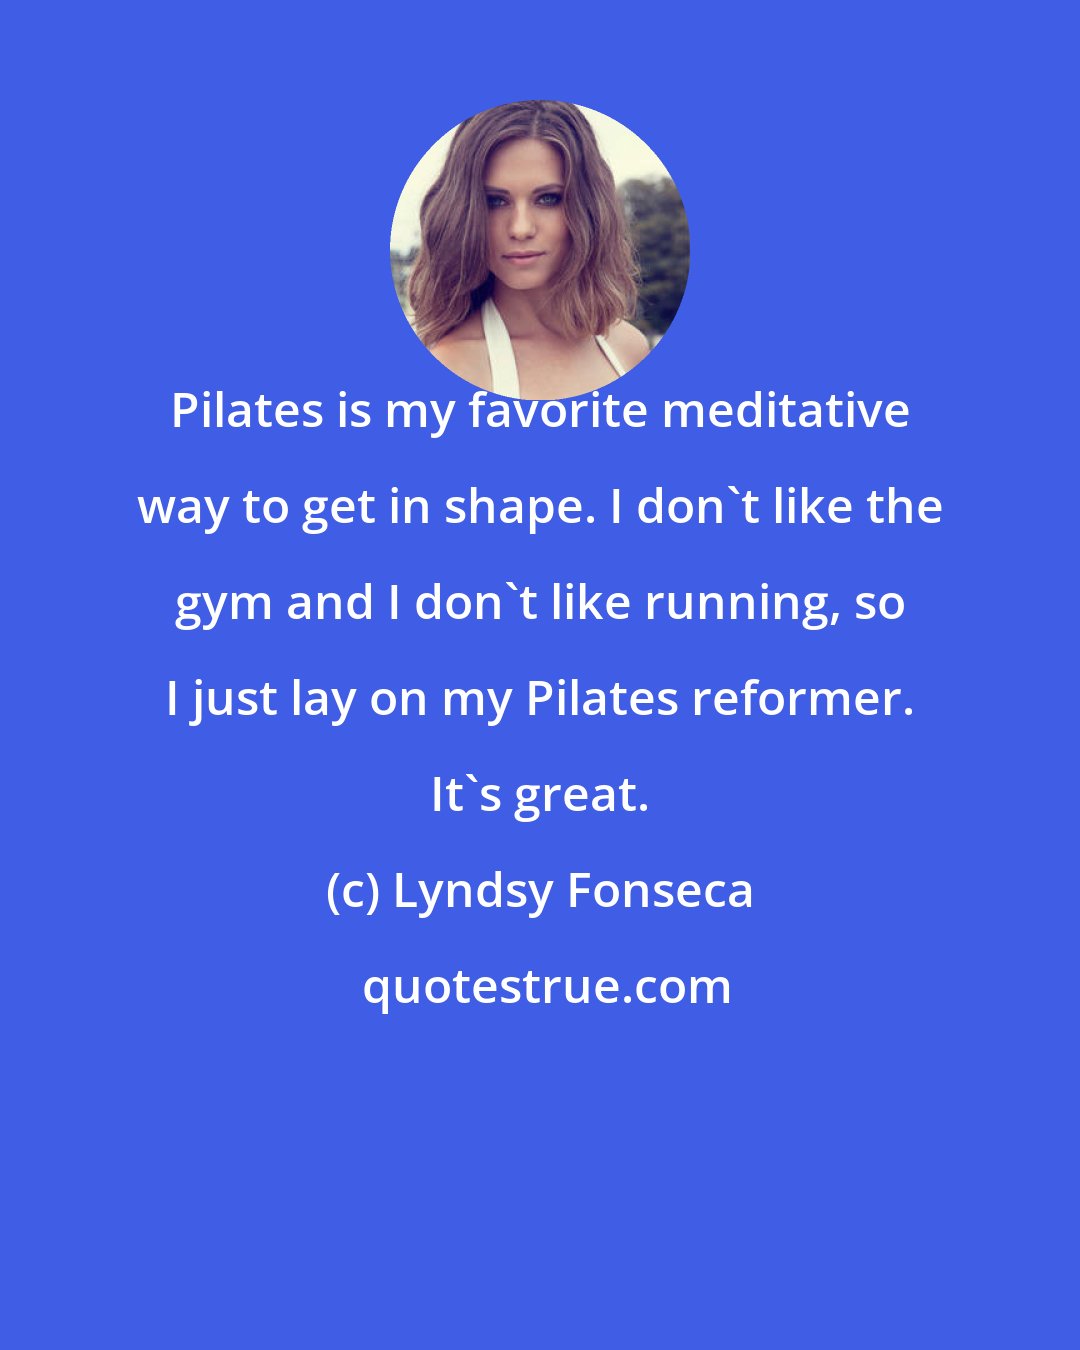 Lyndsy Fonseca: Pilates is my favorite meditative way to get in shape. I don't like the gym and I don't like running, so I just lay on my Pilates reformer. It's great.